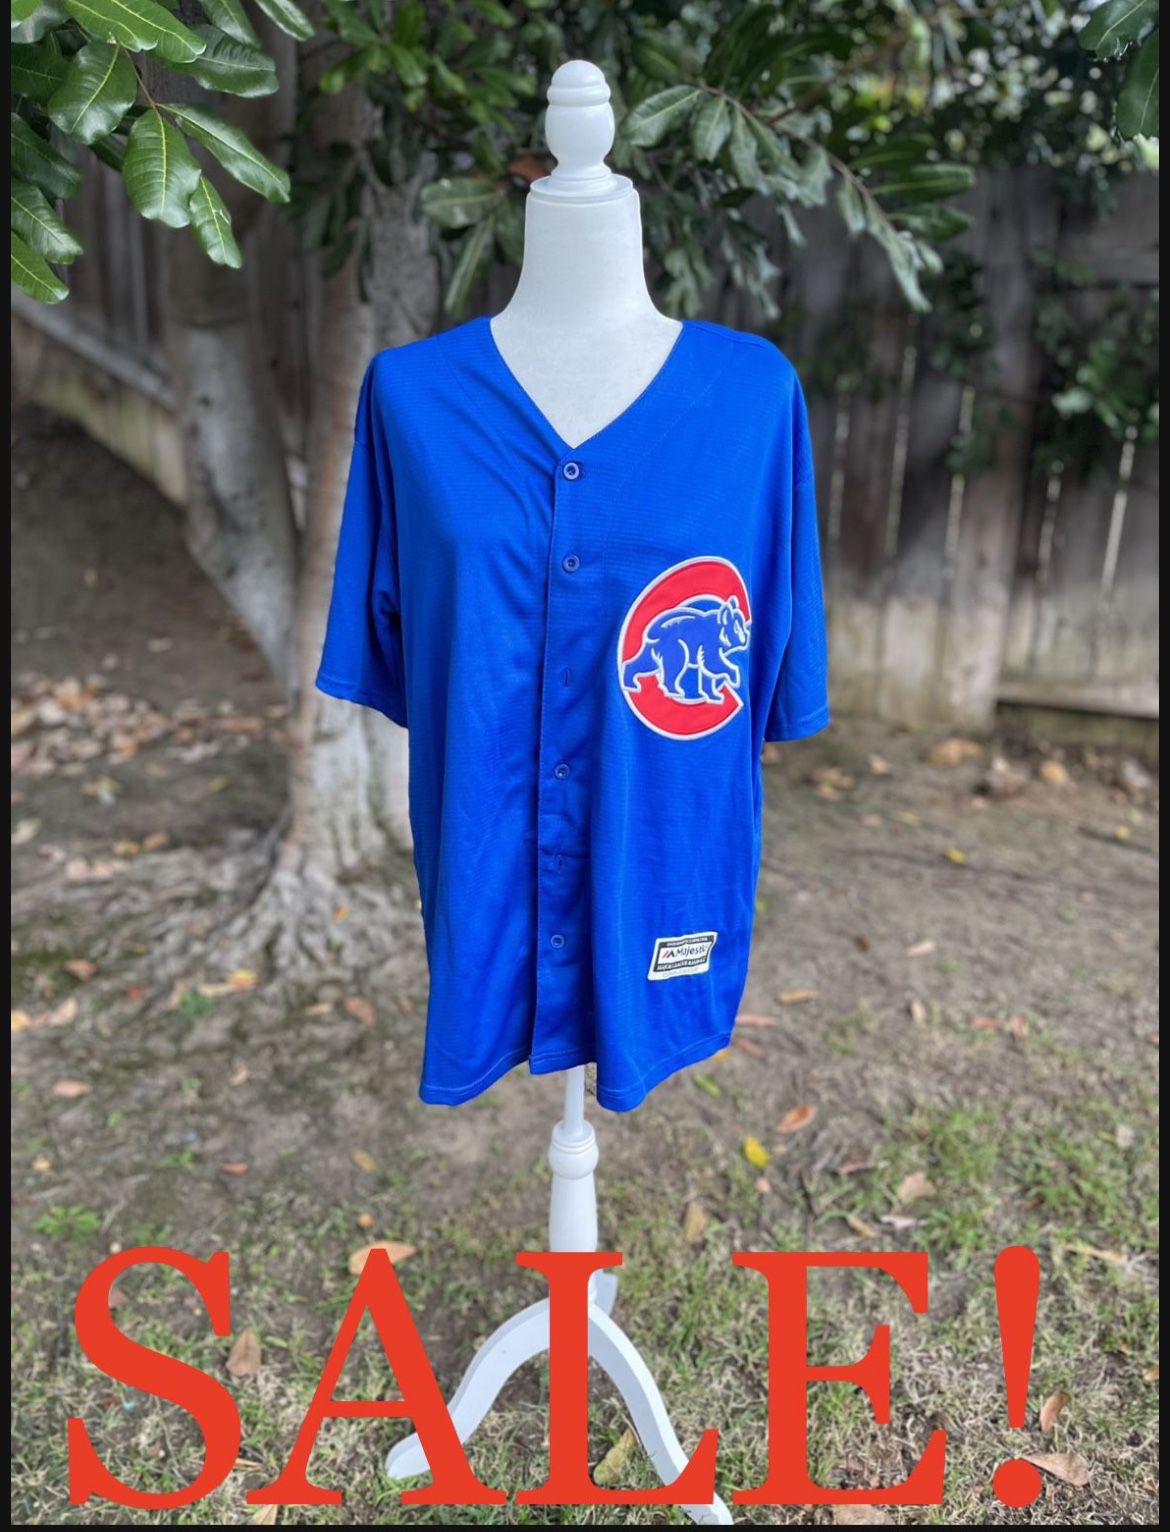 Men’s Royal Blue #17 Chris Bryant Chicago Cubs Jersey Size L. Brand new with Tags